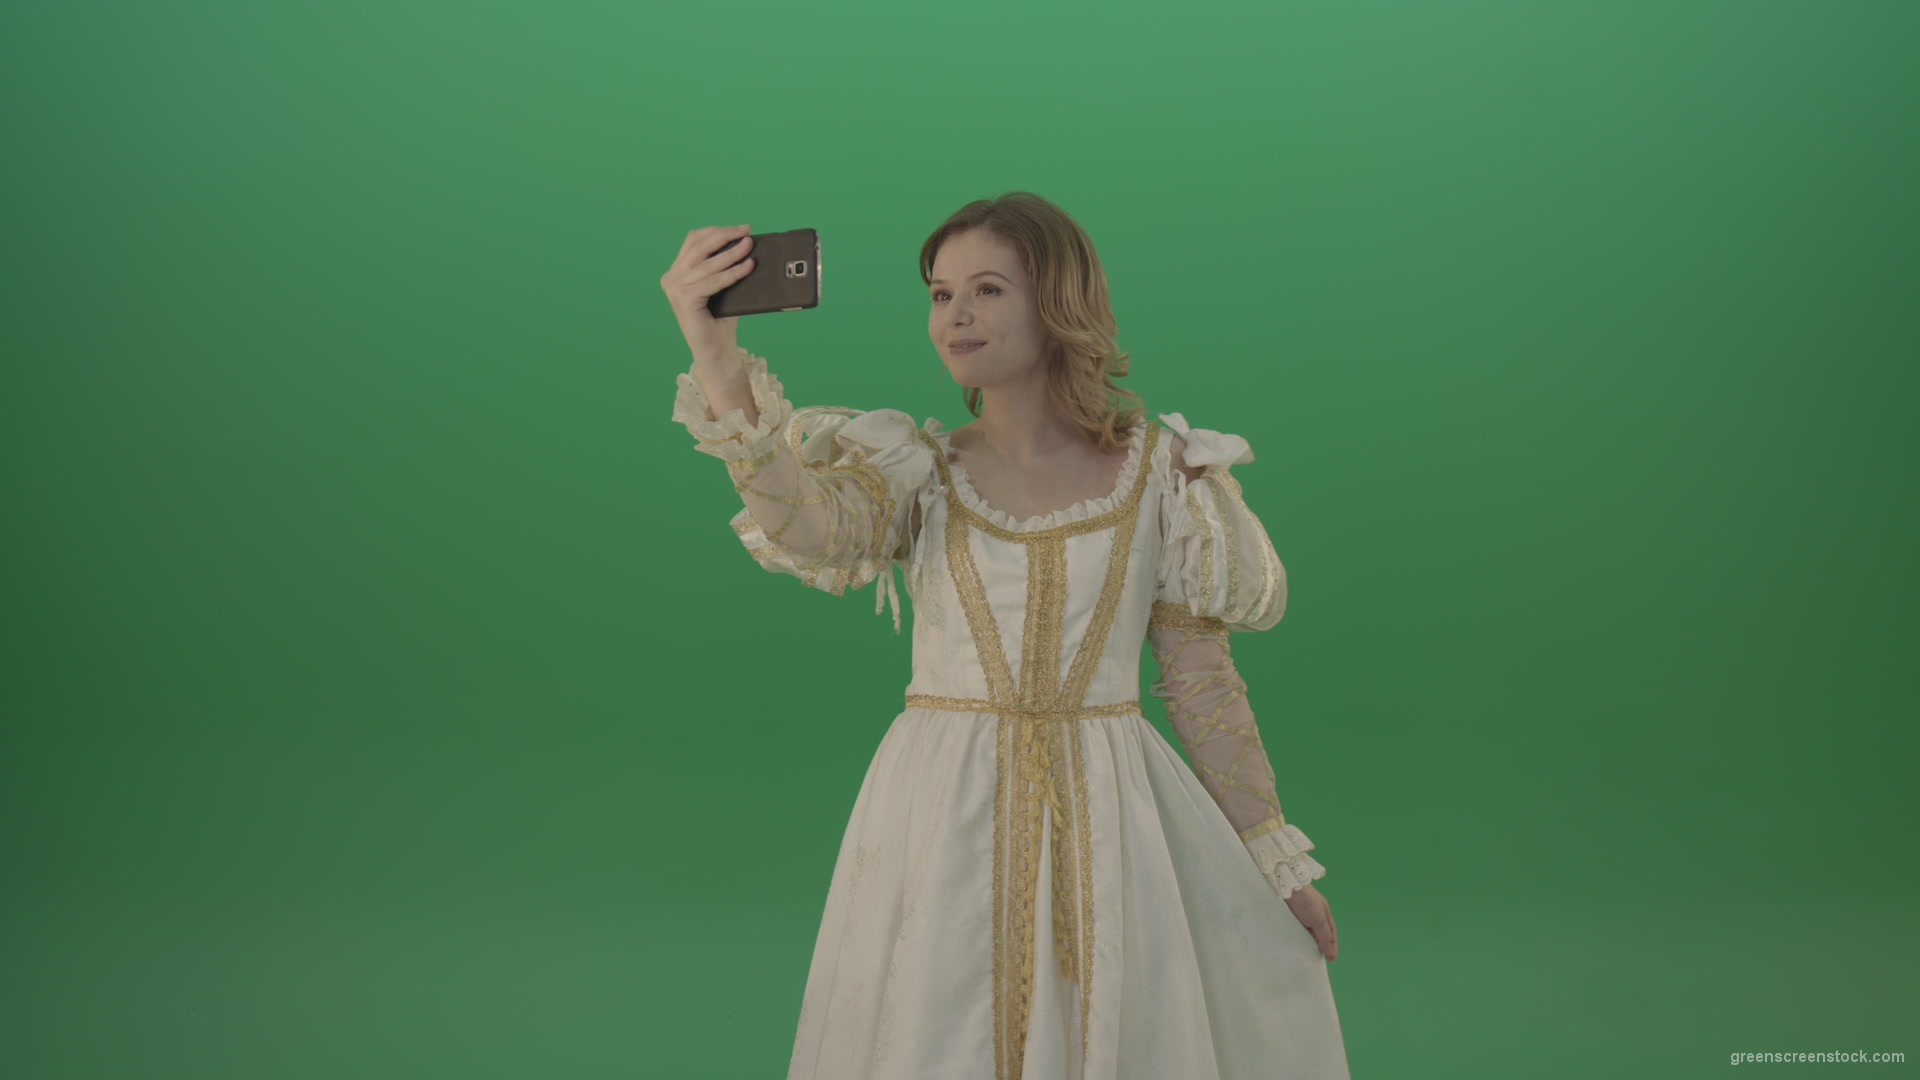 Princess-girl-dressed-in-a-light-suit-makes-a-sephi-on-a-modern-phone-isolated-on-chromakey-background_005 Green Screen Stock